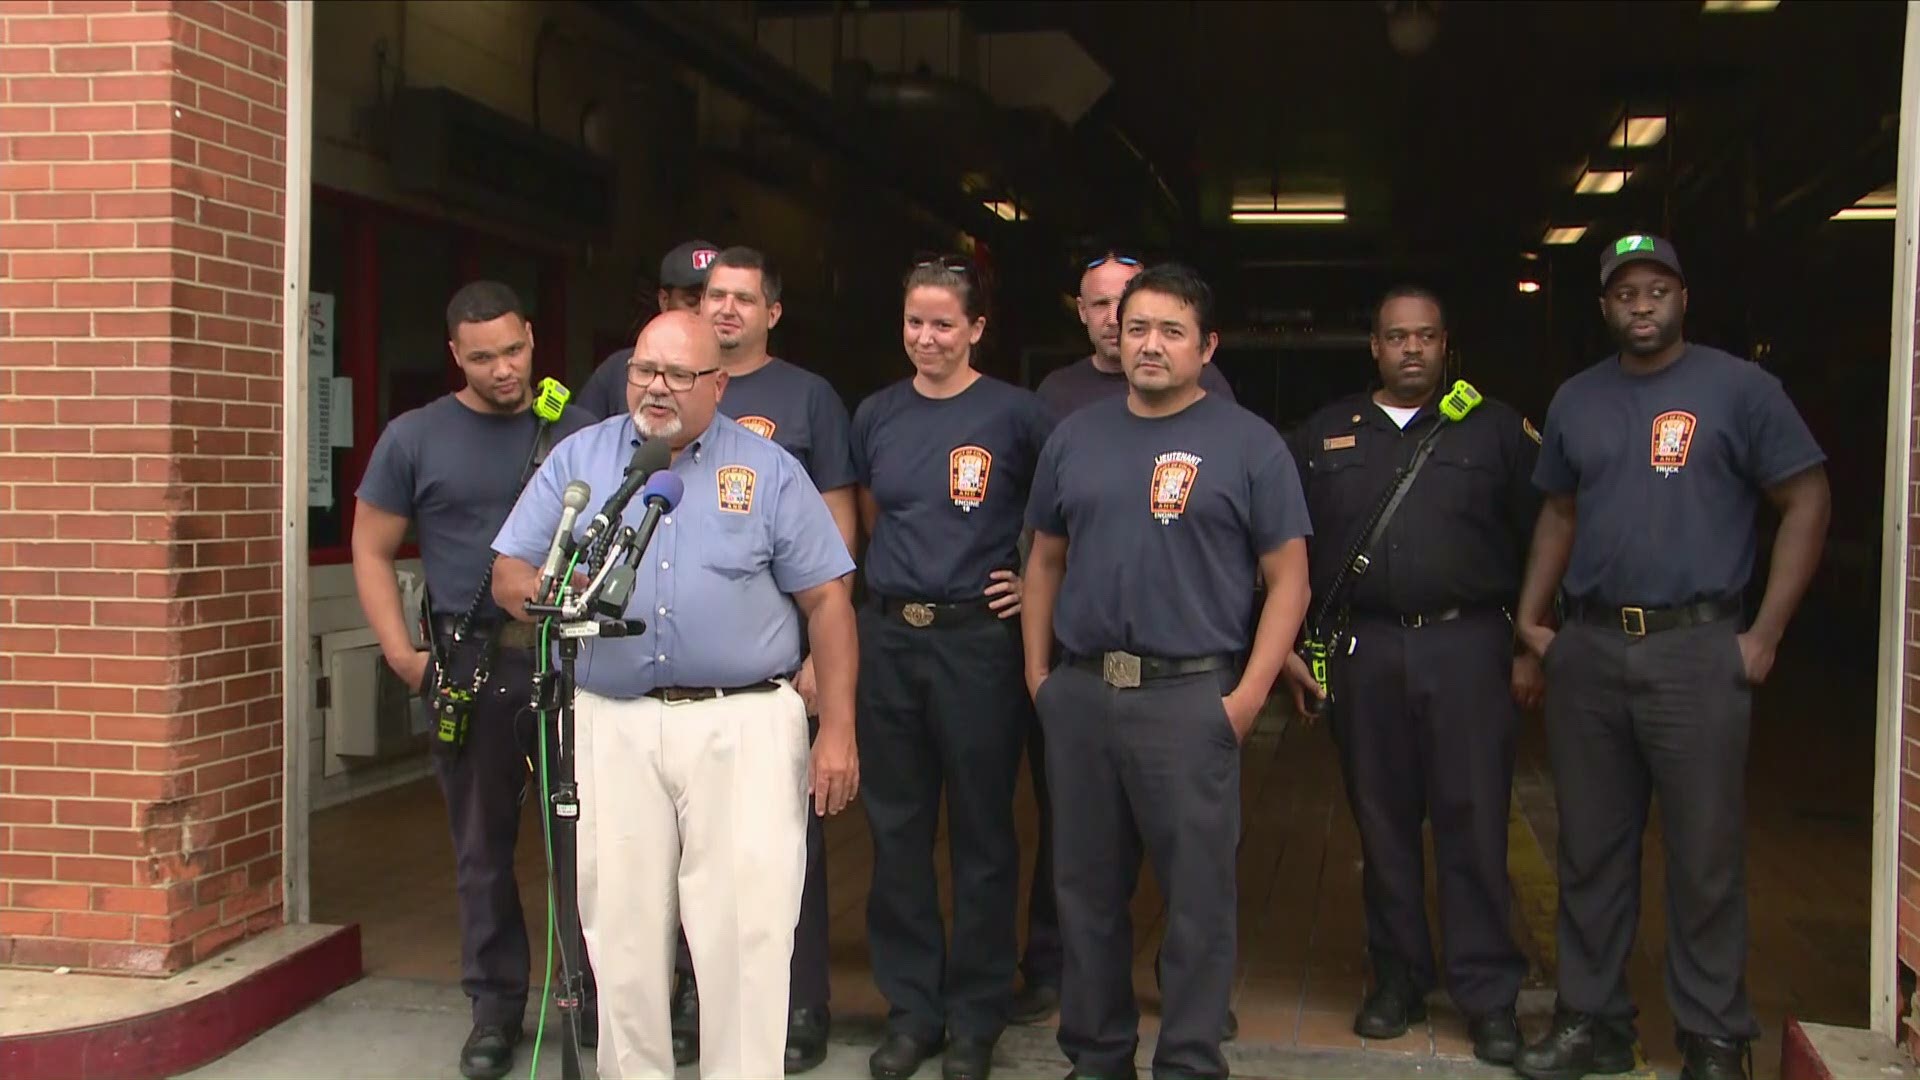 Firefighters deliver baby girl at SE DC fire station.